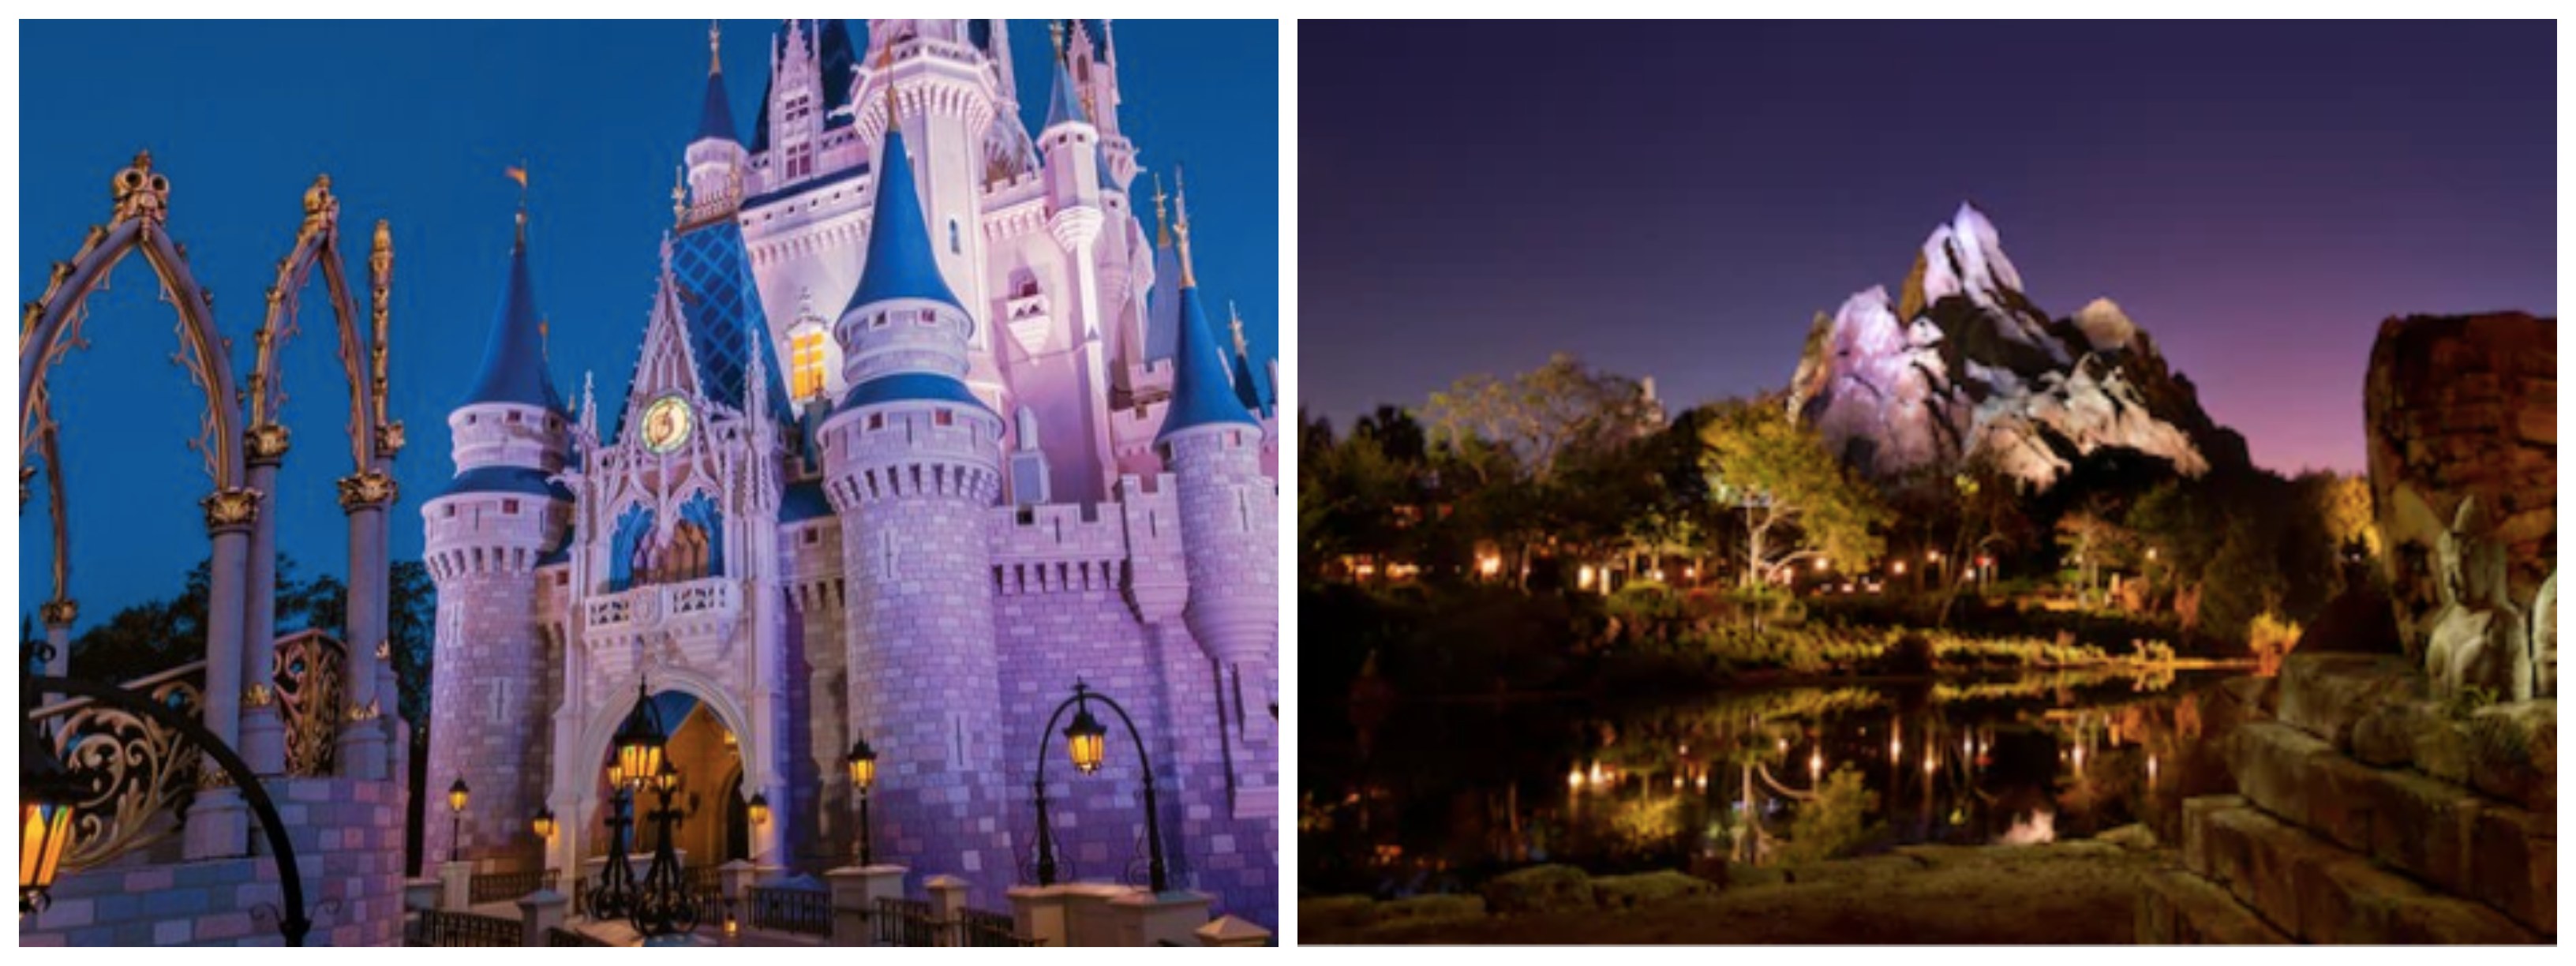 Additional Dates for Disney World “Disney After Hours” 2020 on Sale Now!